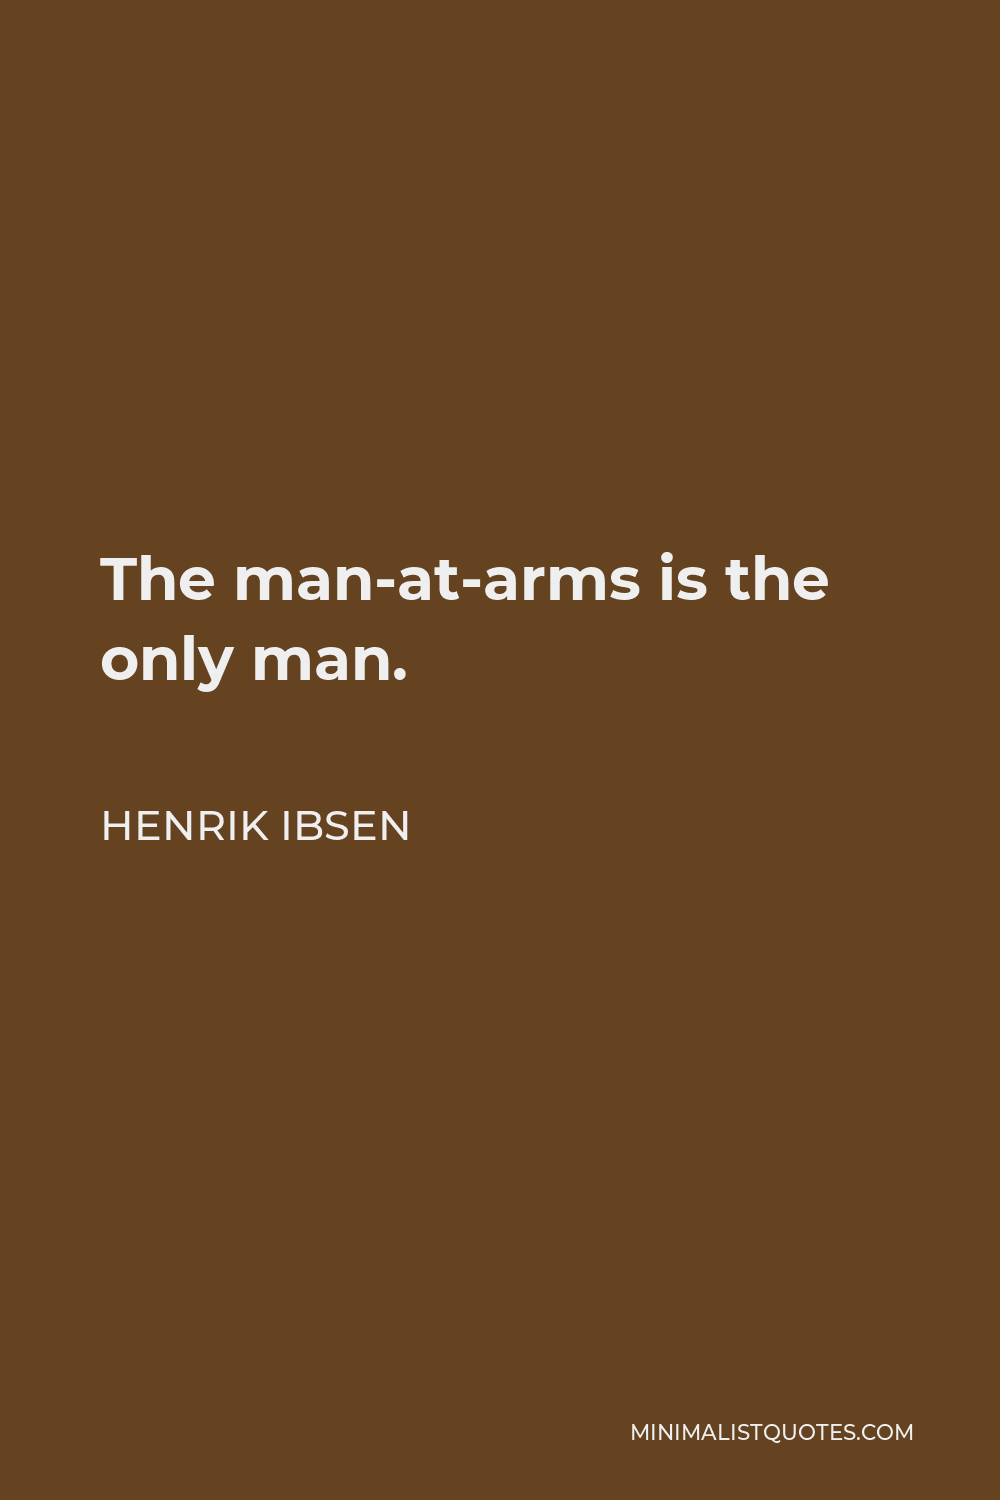 Henrik Ibsen Quote - The man-at-arms is the only man.